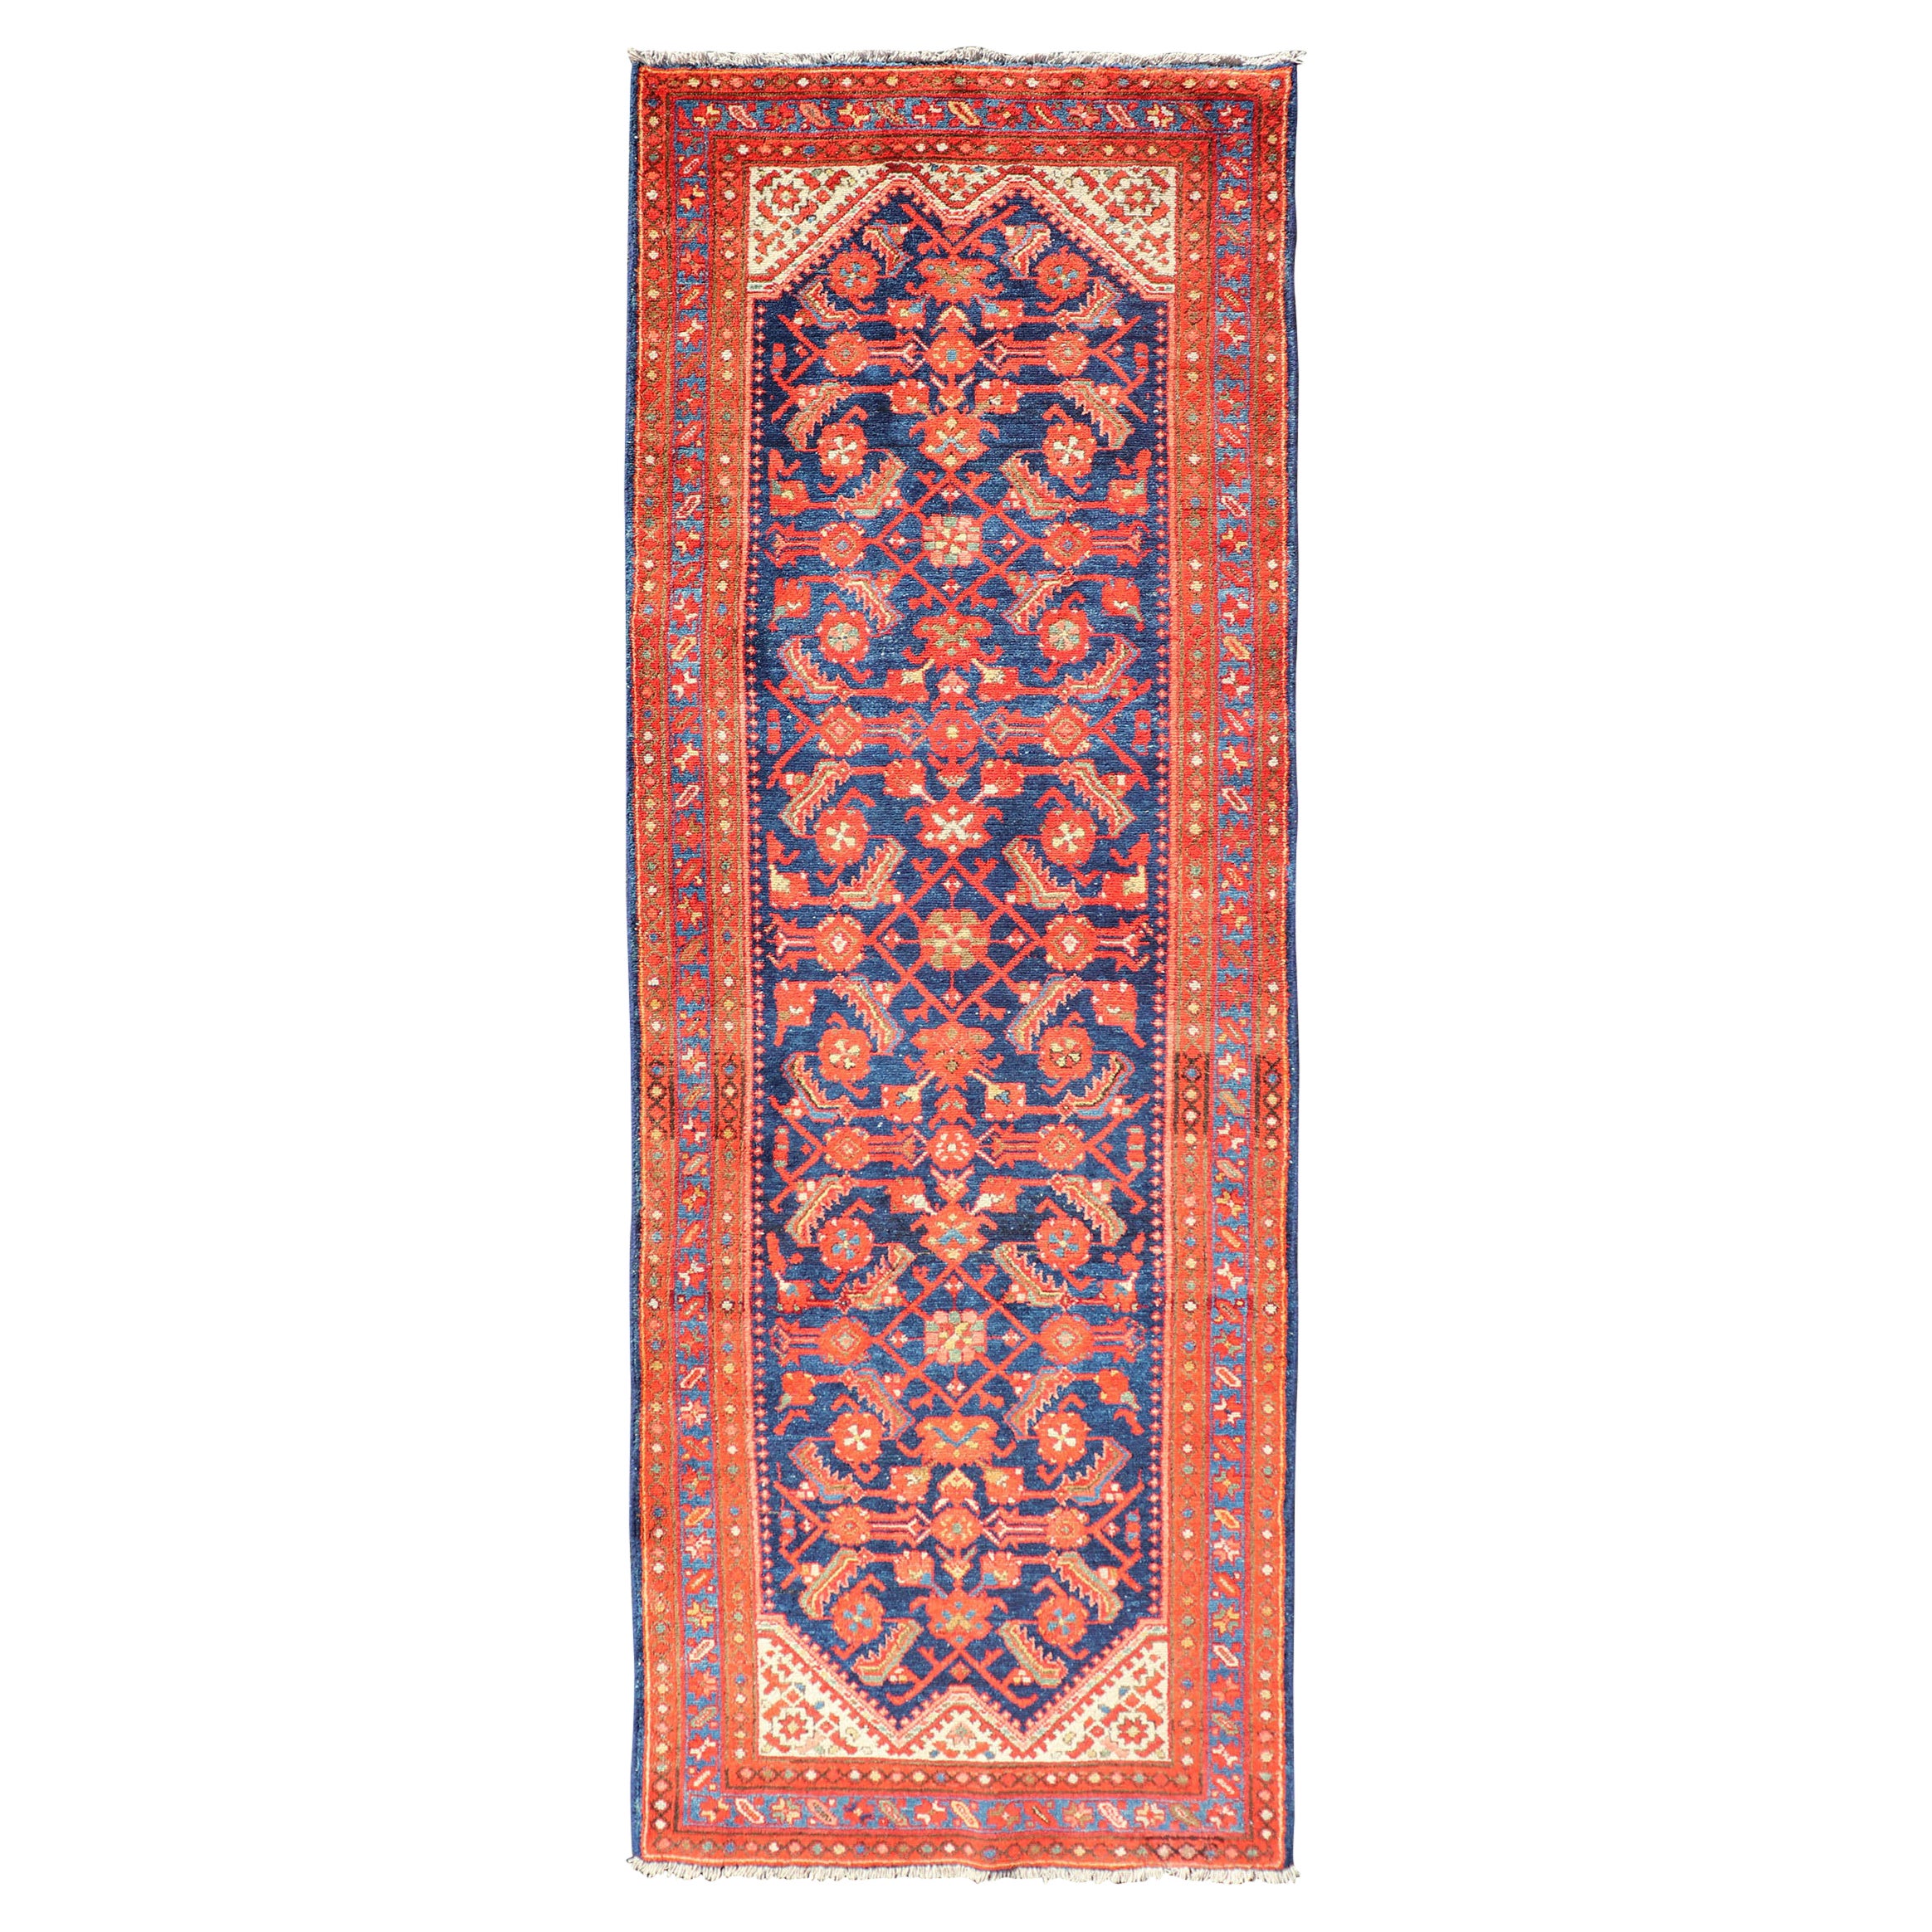 Antique Malayer Runner with All-Over Geometric Herati Design